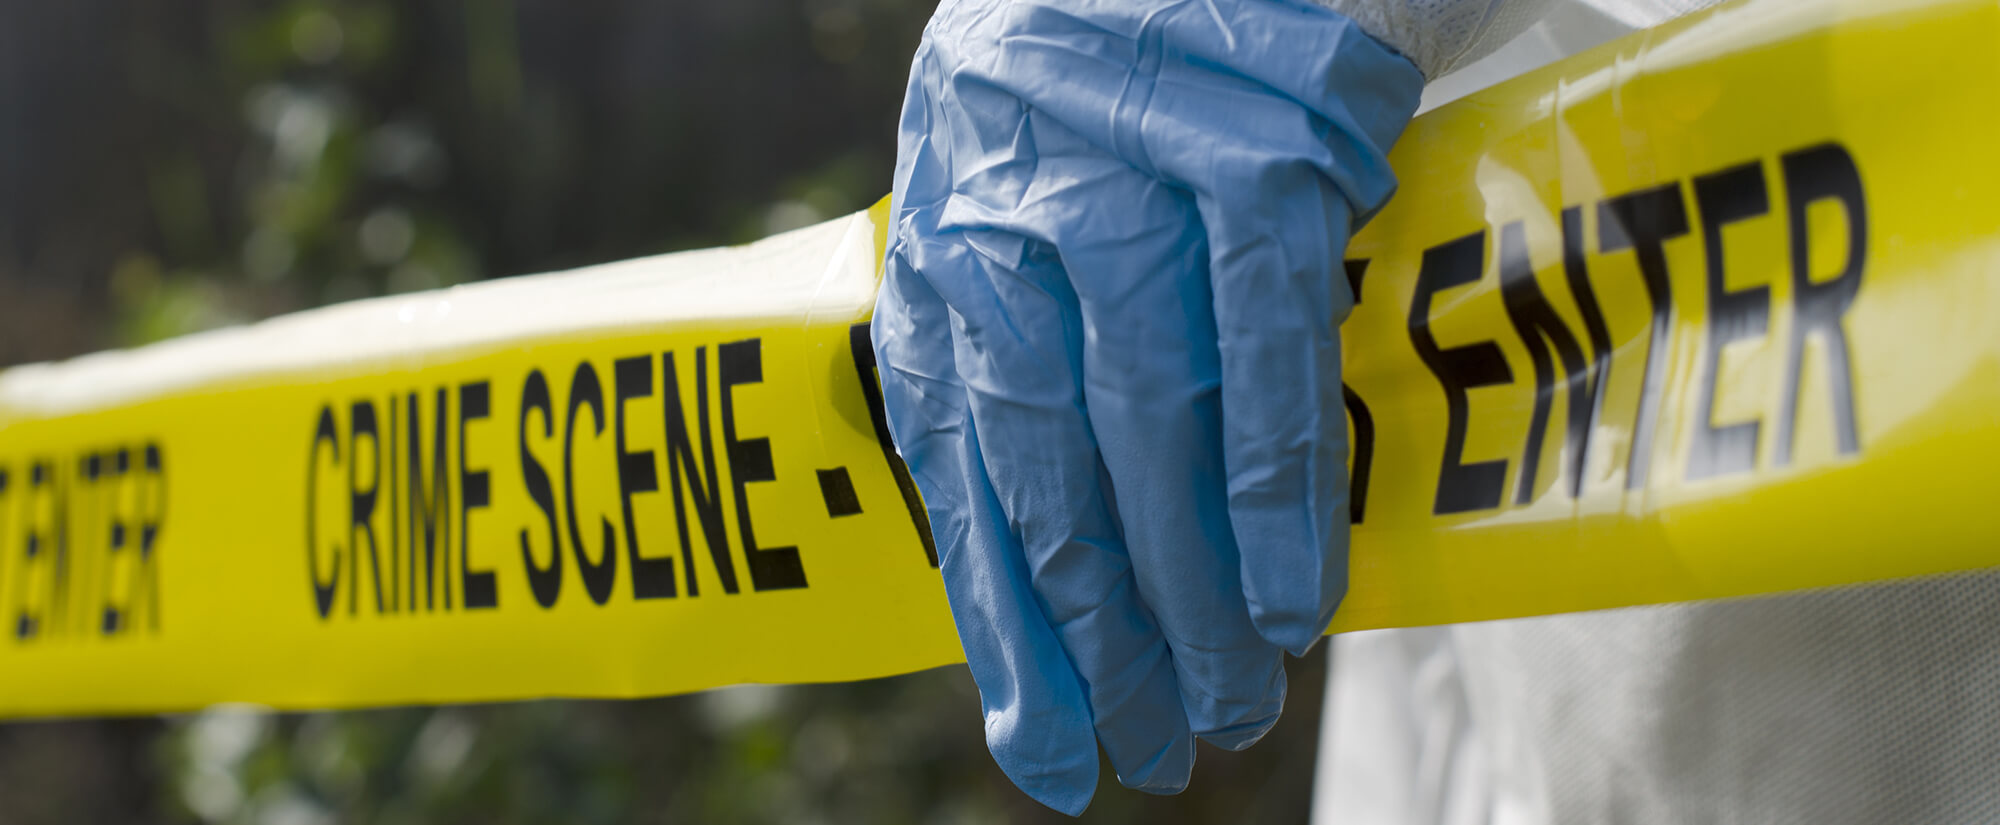 Photo of a gloved hand holding up a section of yellow crime scene tape.